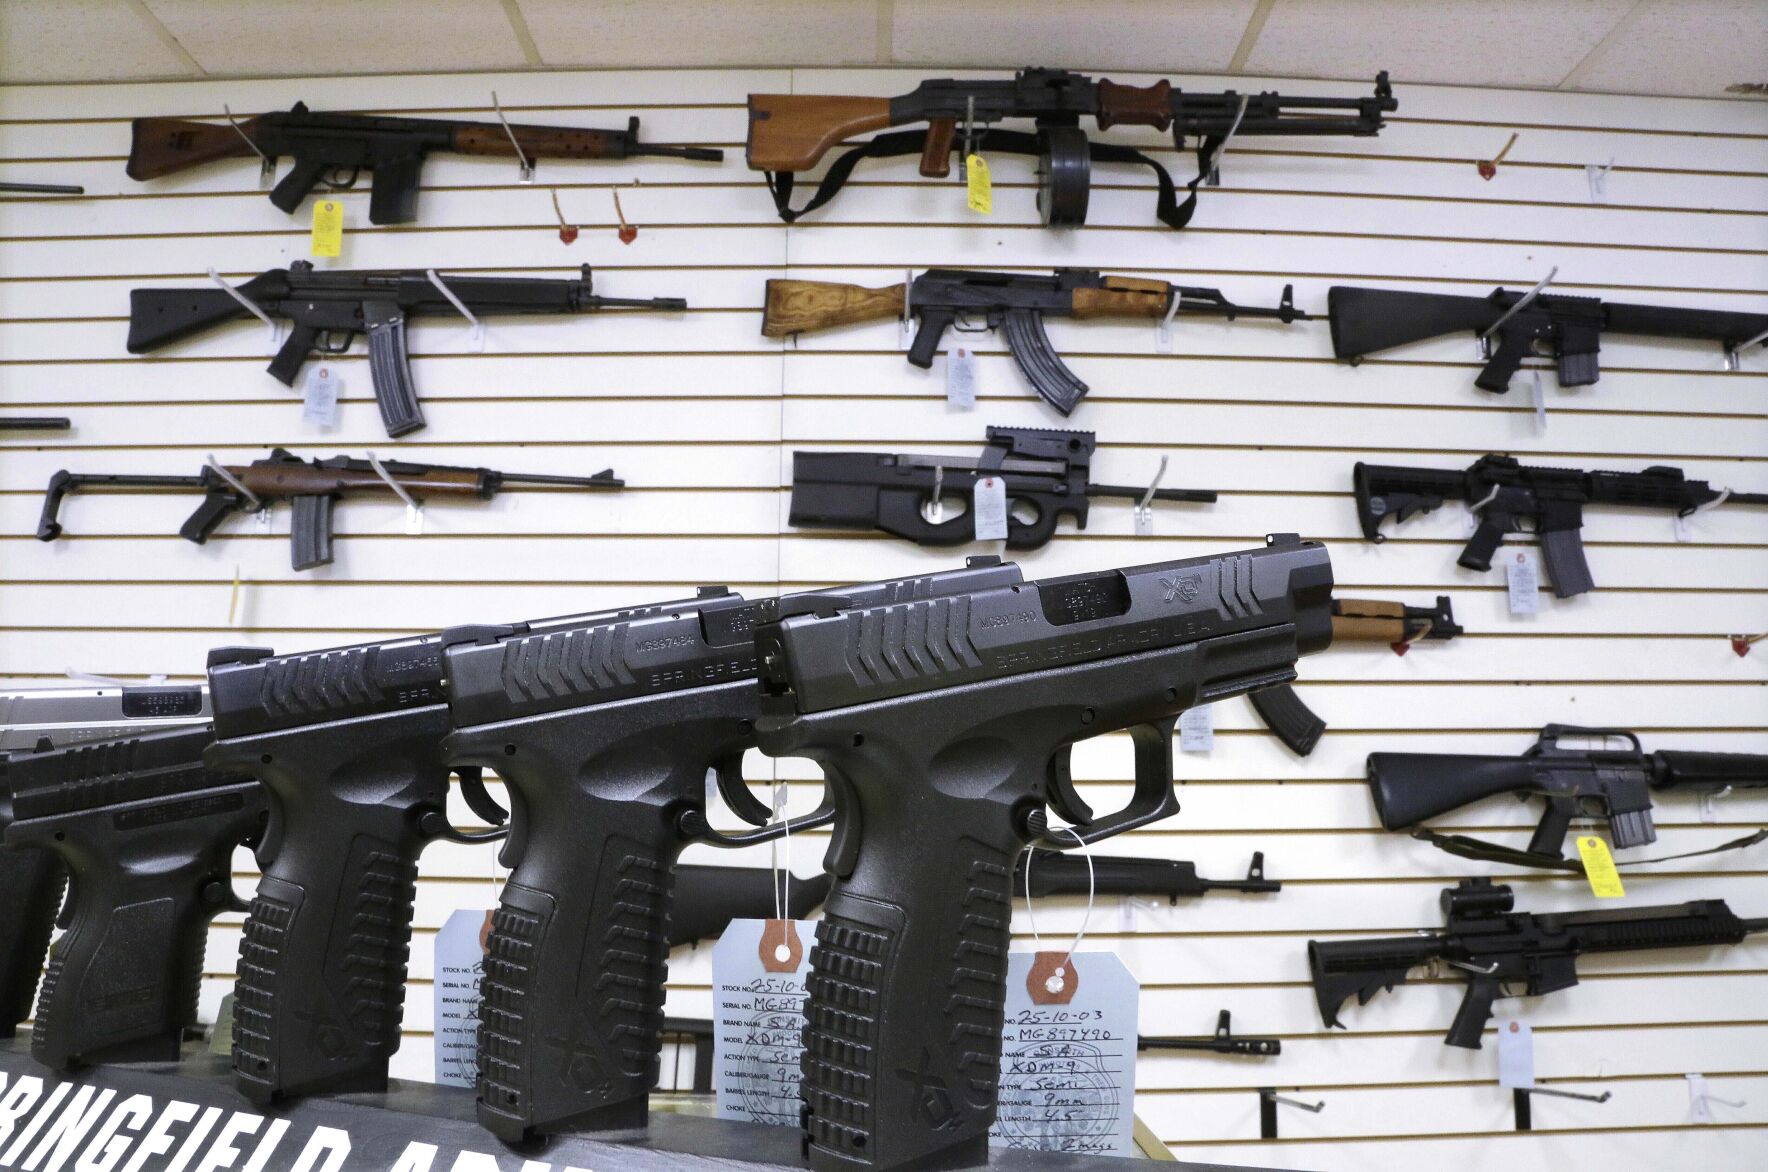 <p>FILE - Semi-automatic guns are displayed for sale at Capitol City Arms Supply, Jan. 16, 2013, in Springfield, Ill. Illinois will soon outlaw advertising for firearms that officials determine produces a public safety threat or appeals to children, militants or others who might later use them illegally, as the state continues its quest to curb mass shootings. (AP Photo/Seth Perlman, File)</p>   PHOTO CREDIT: Seth Perlman 